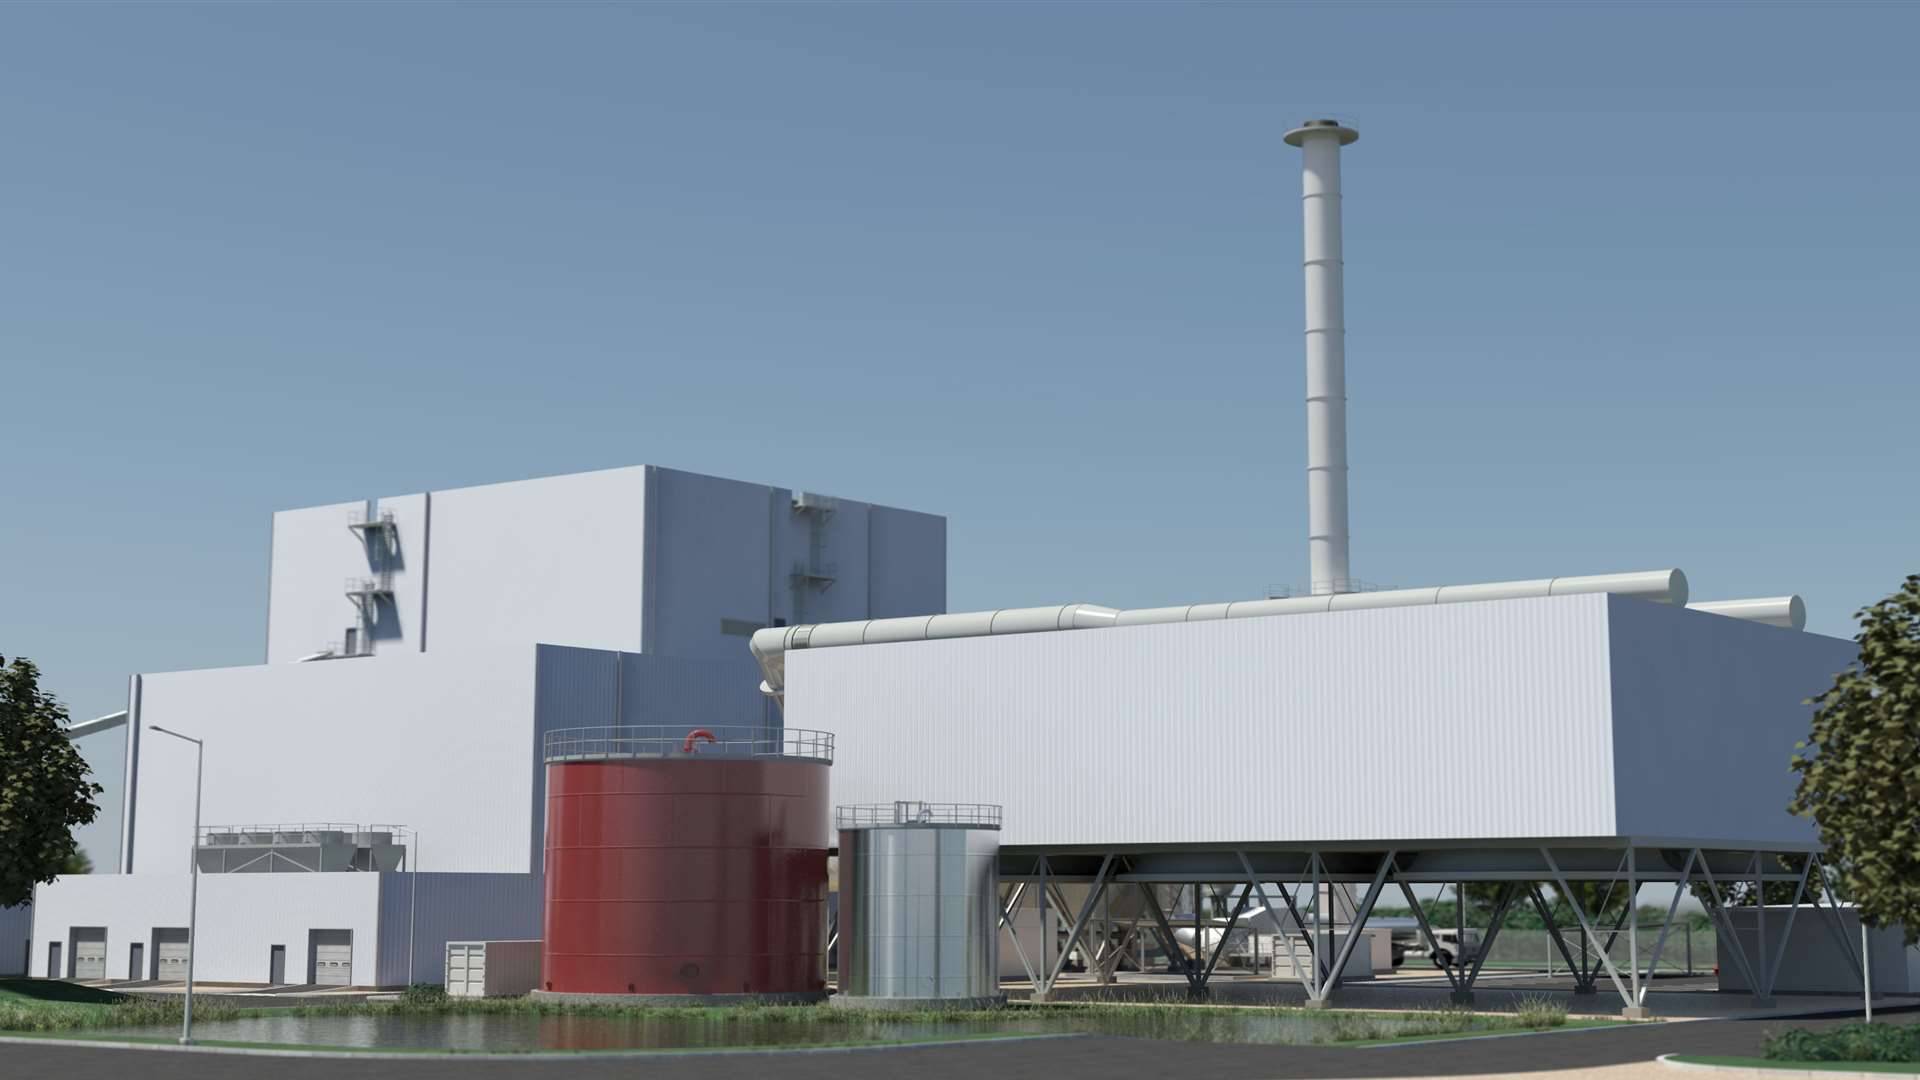 The biomass plant will be built by Danish engineering company BWSC after an investment by a fund managed by Copenhagen Infrastructure Partners